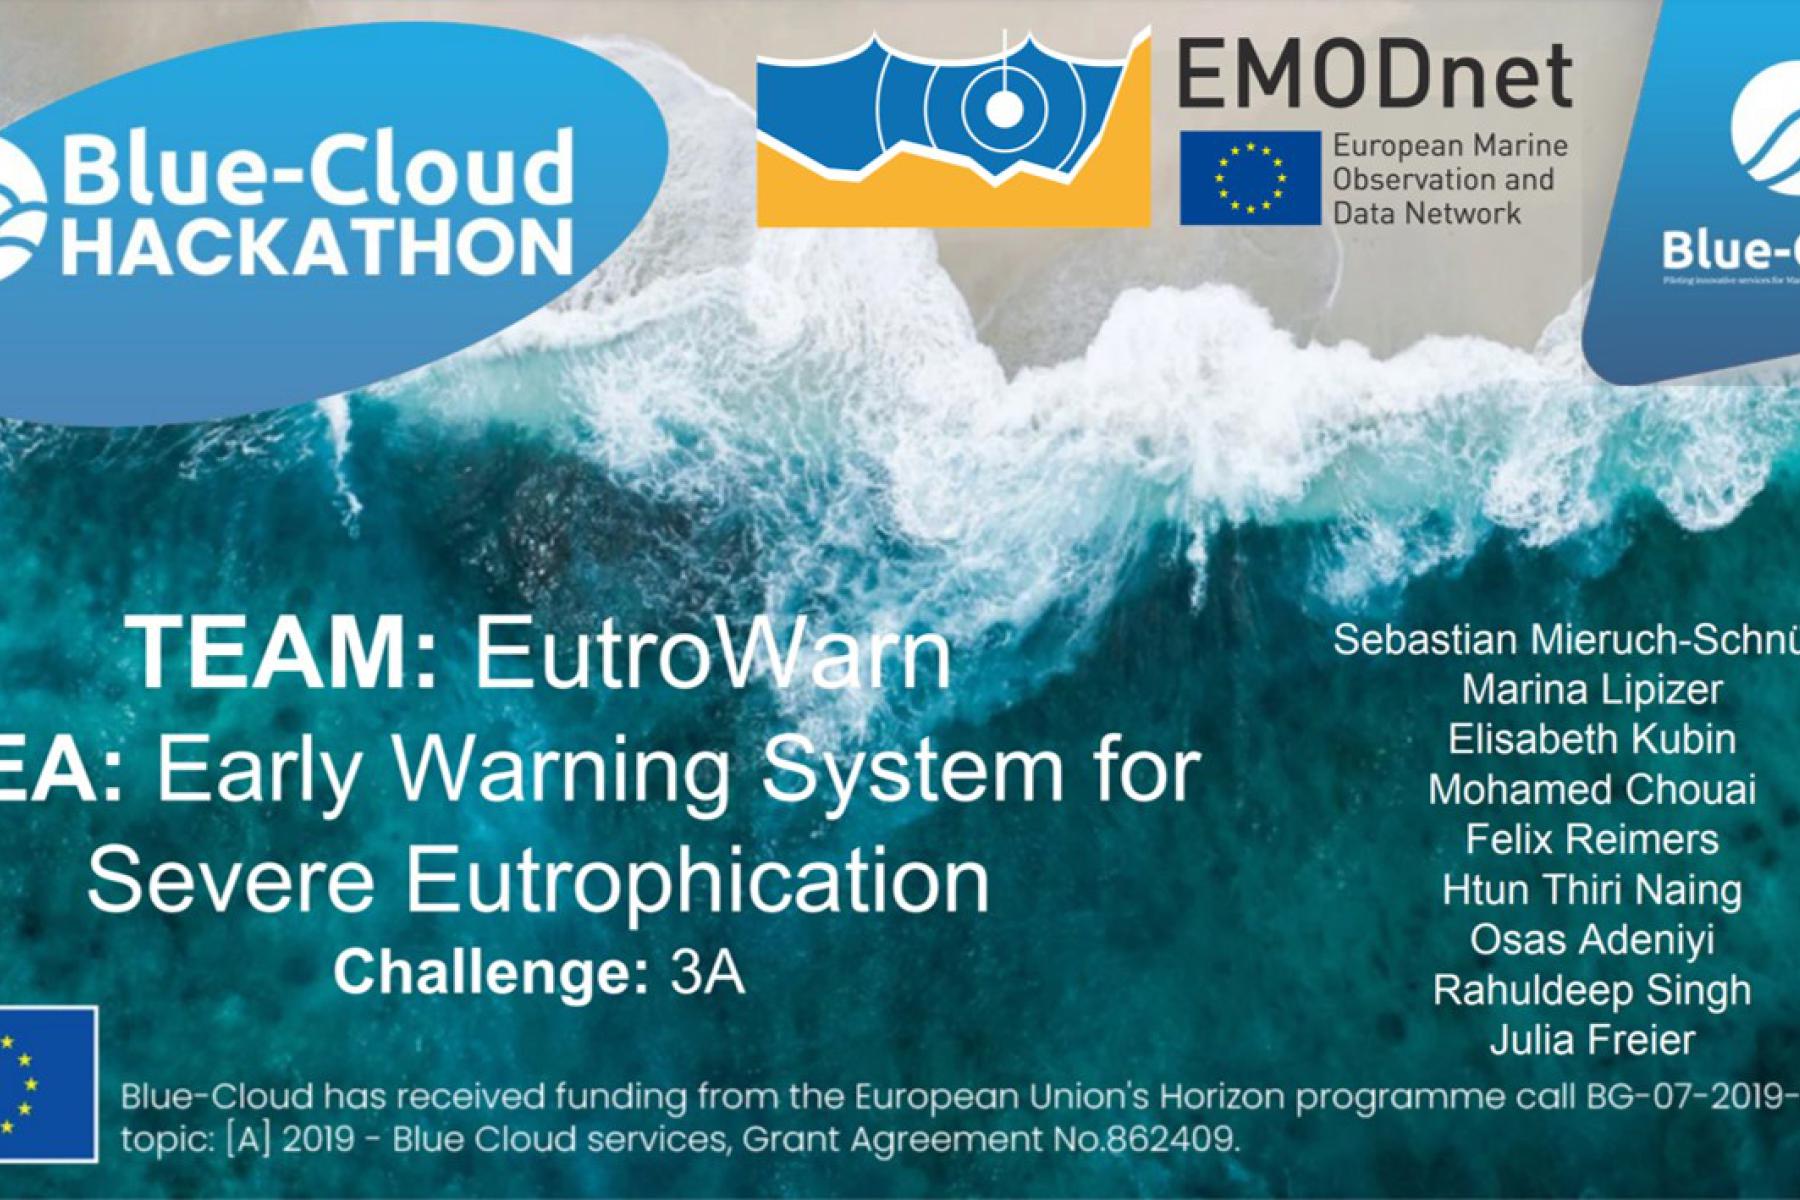 EMODnet Chemistry data was used for prototyping an Early Warning System for Severe Eutrophication at the Blue-Cloud Hackathon 2022.